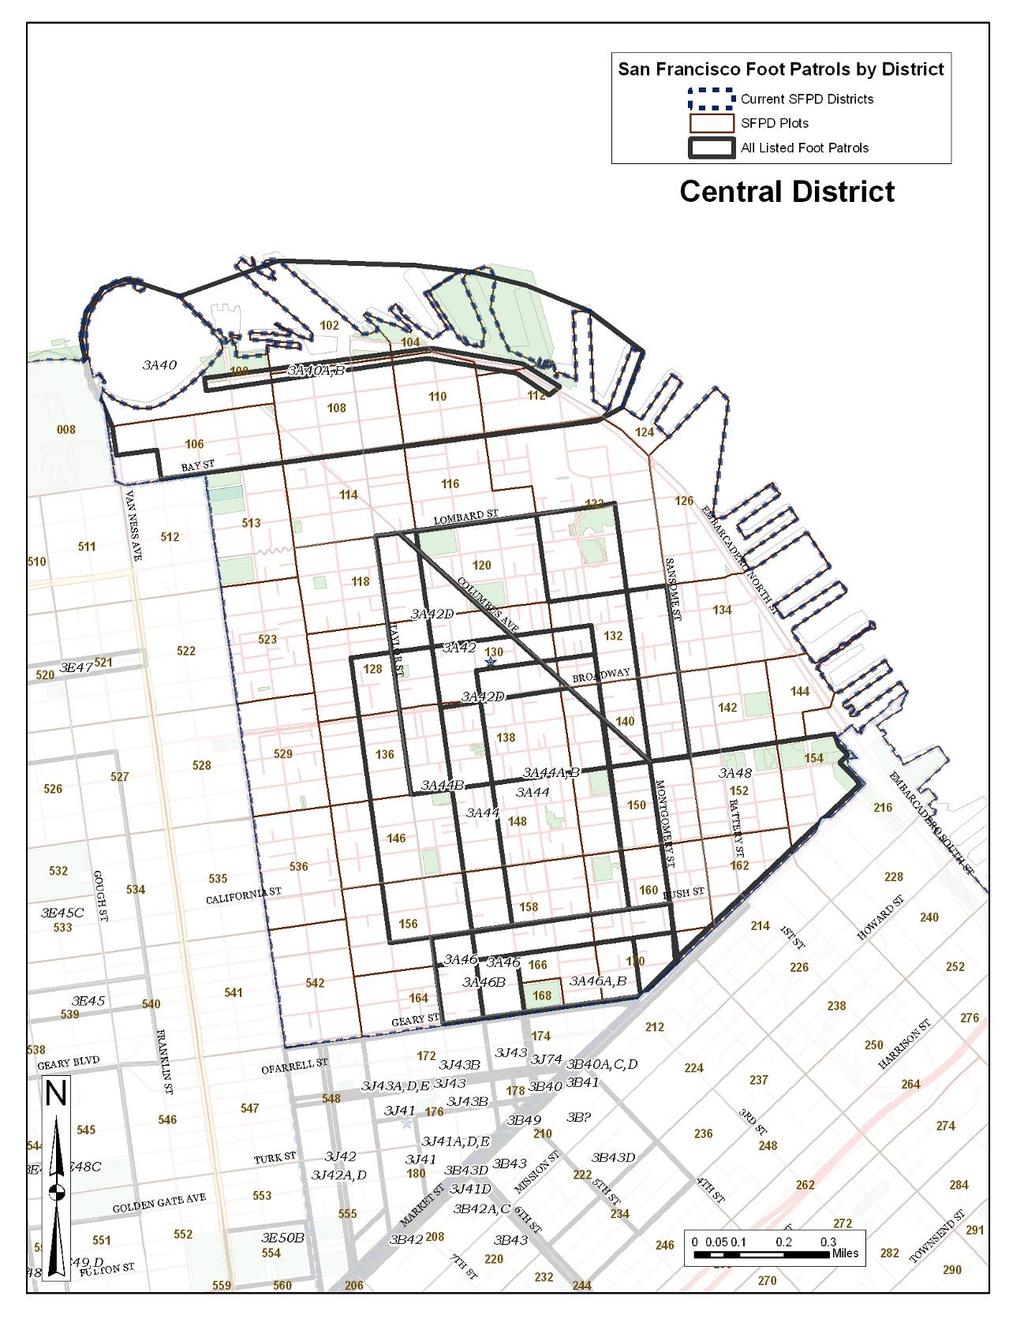 Map 10: Central District Beats 2007 55 Source: PSSG based on SFPD shape files and